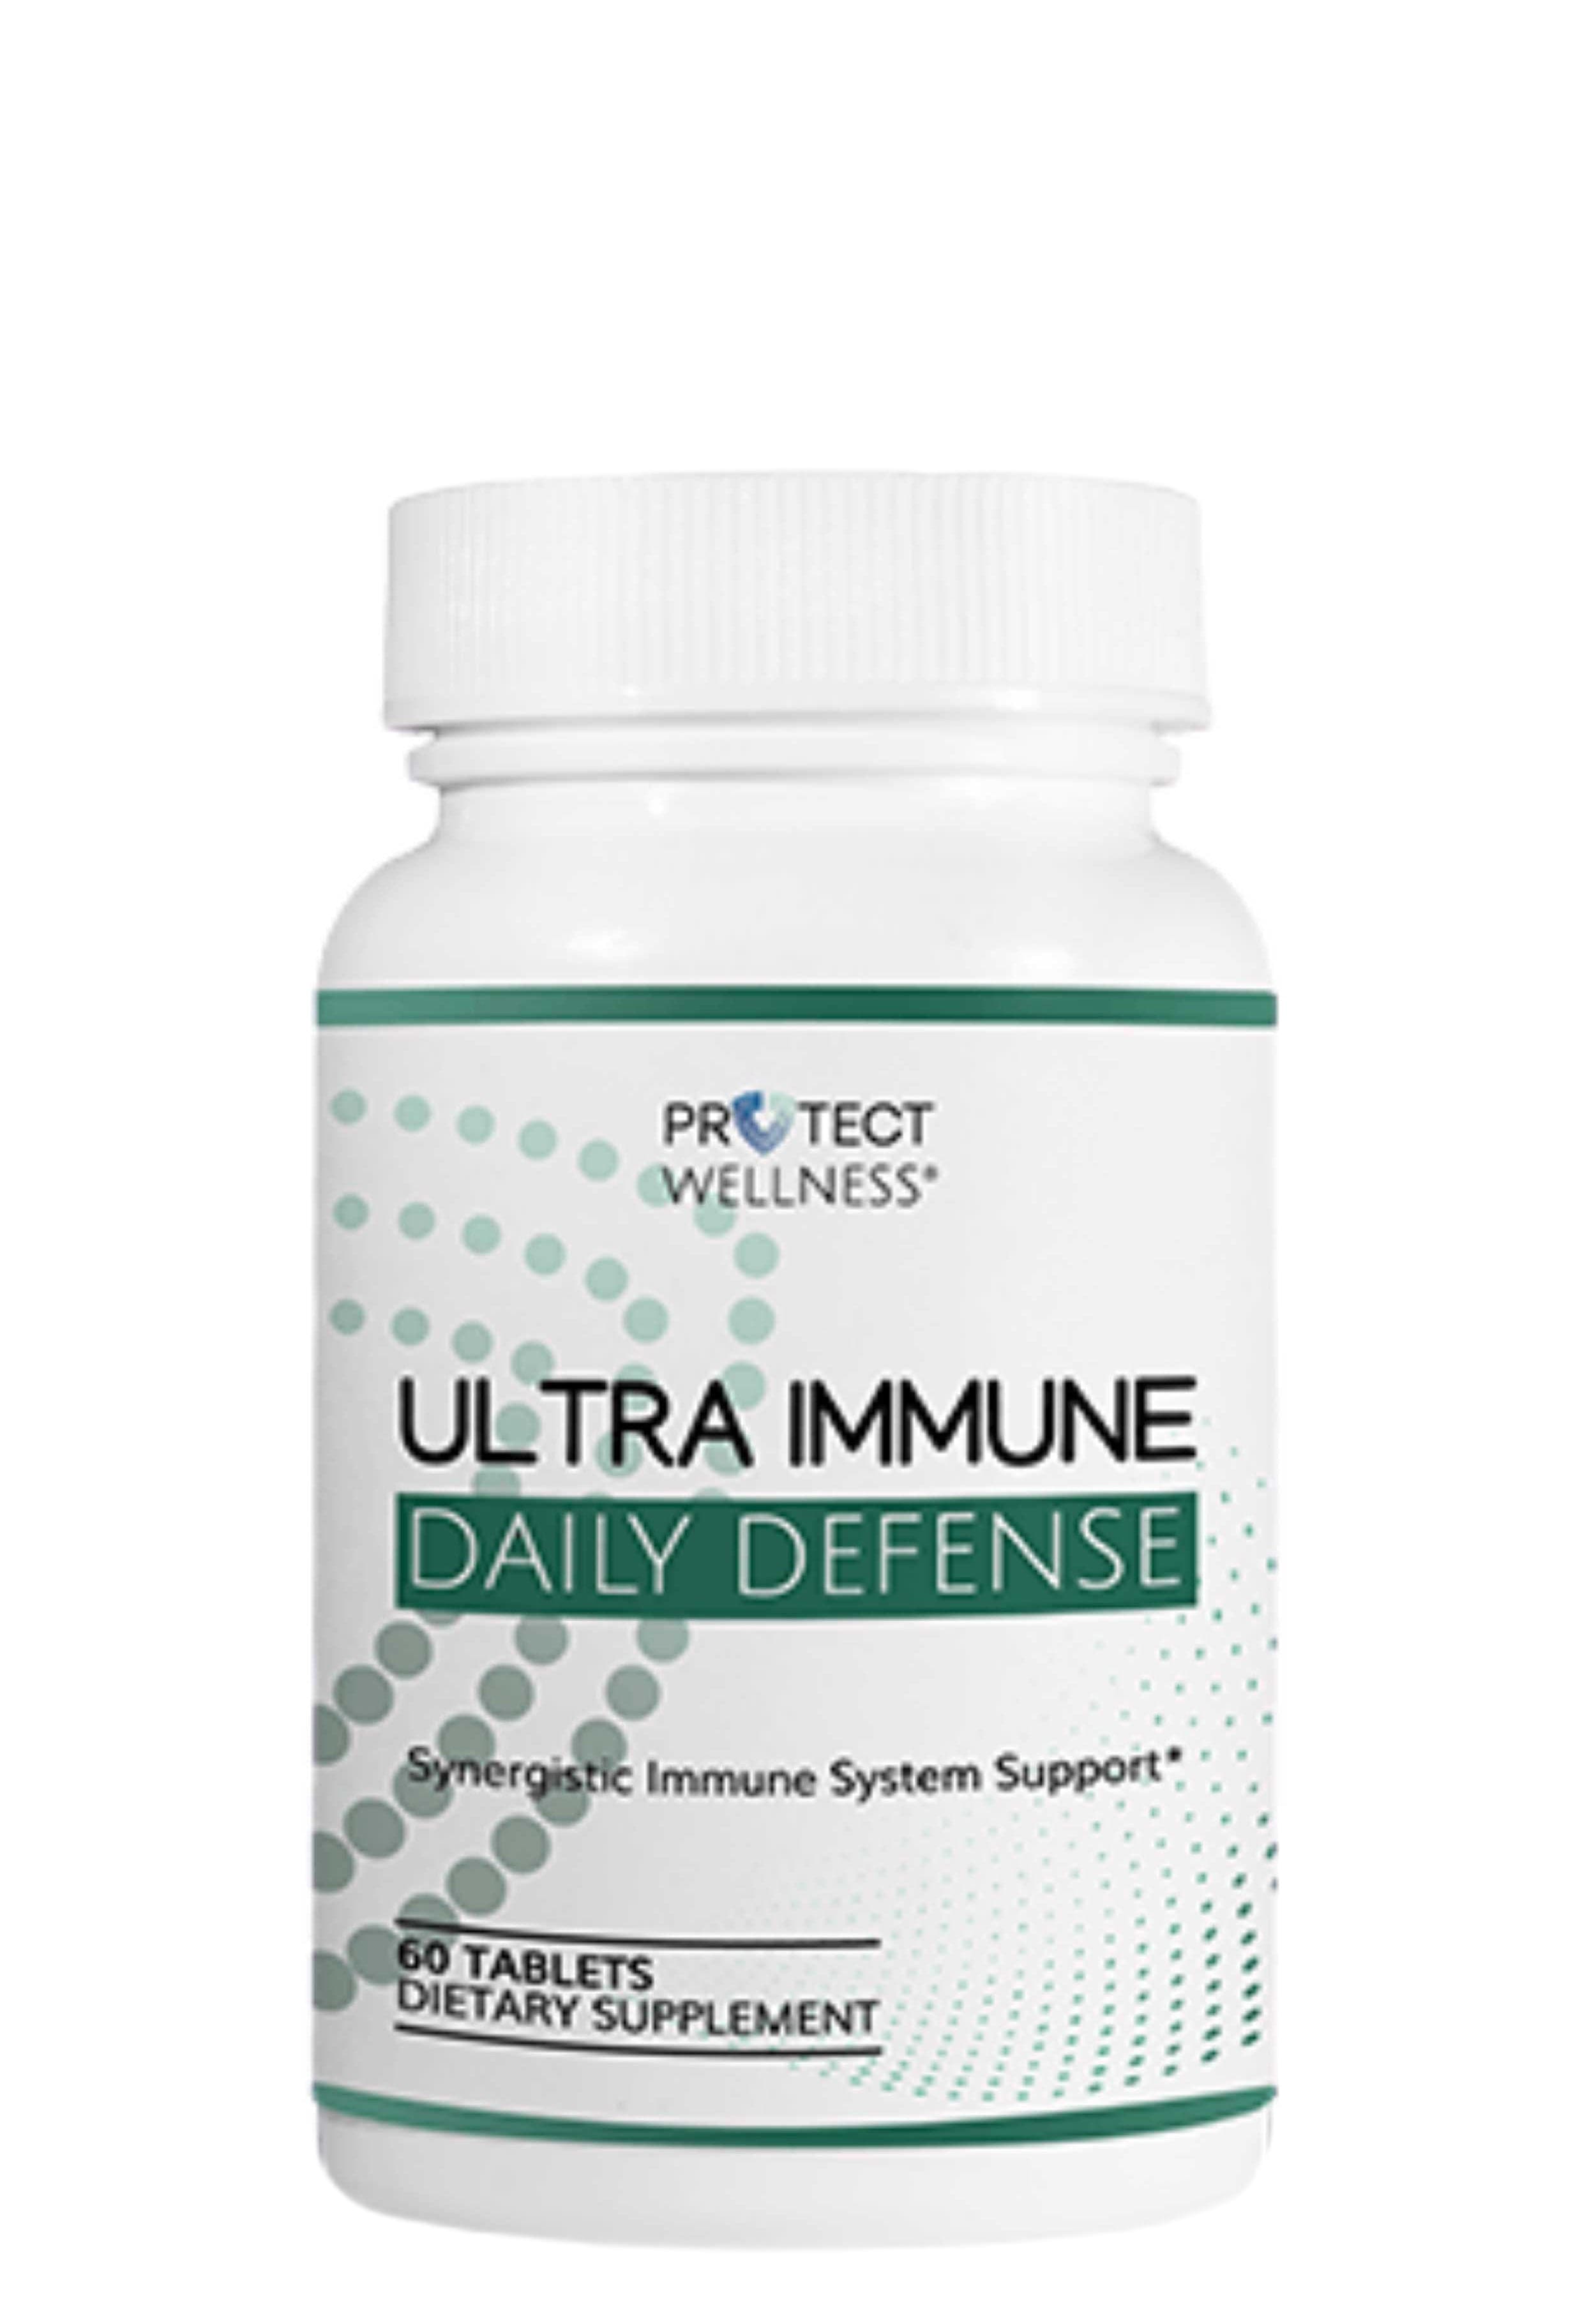 Protect Wellness Ultra Immune Daily Defense